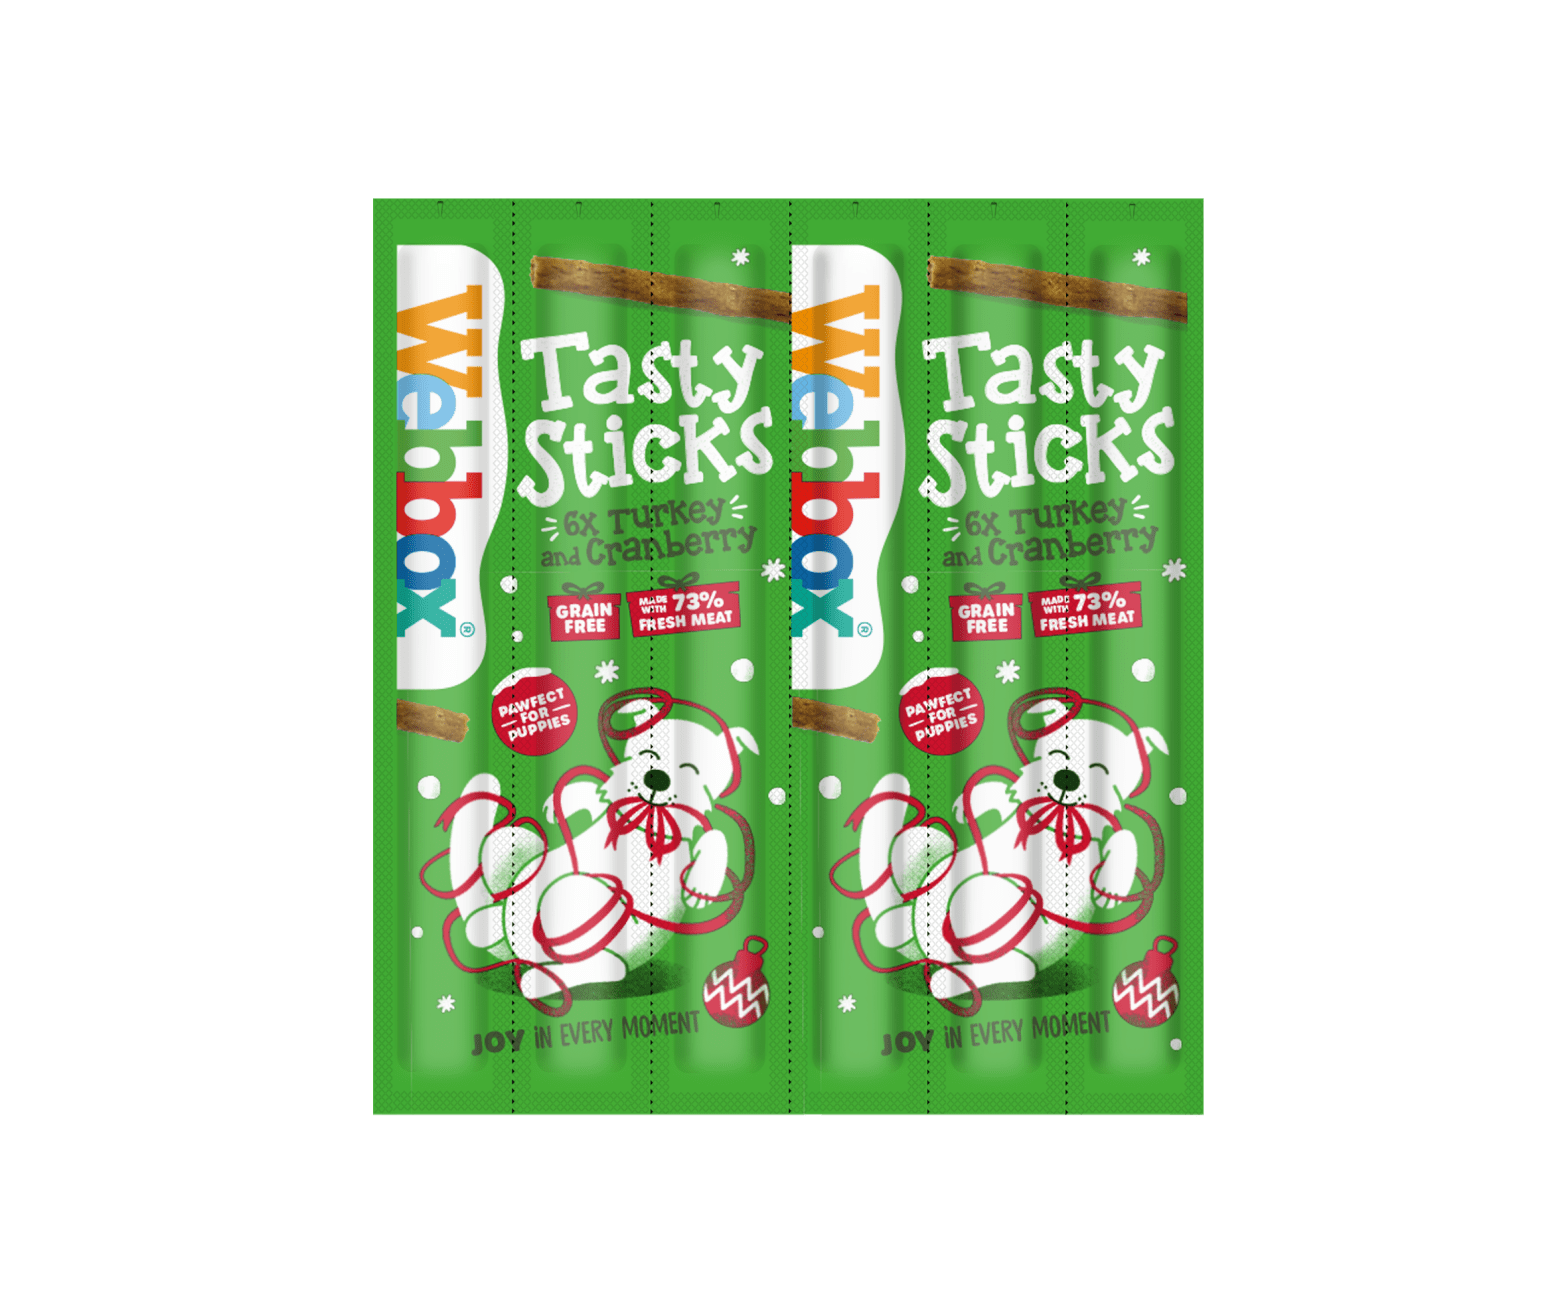 Webbox Christmas Tasty Sticks for Dogs – with Turkey and Cranberry